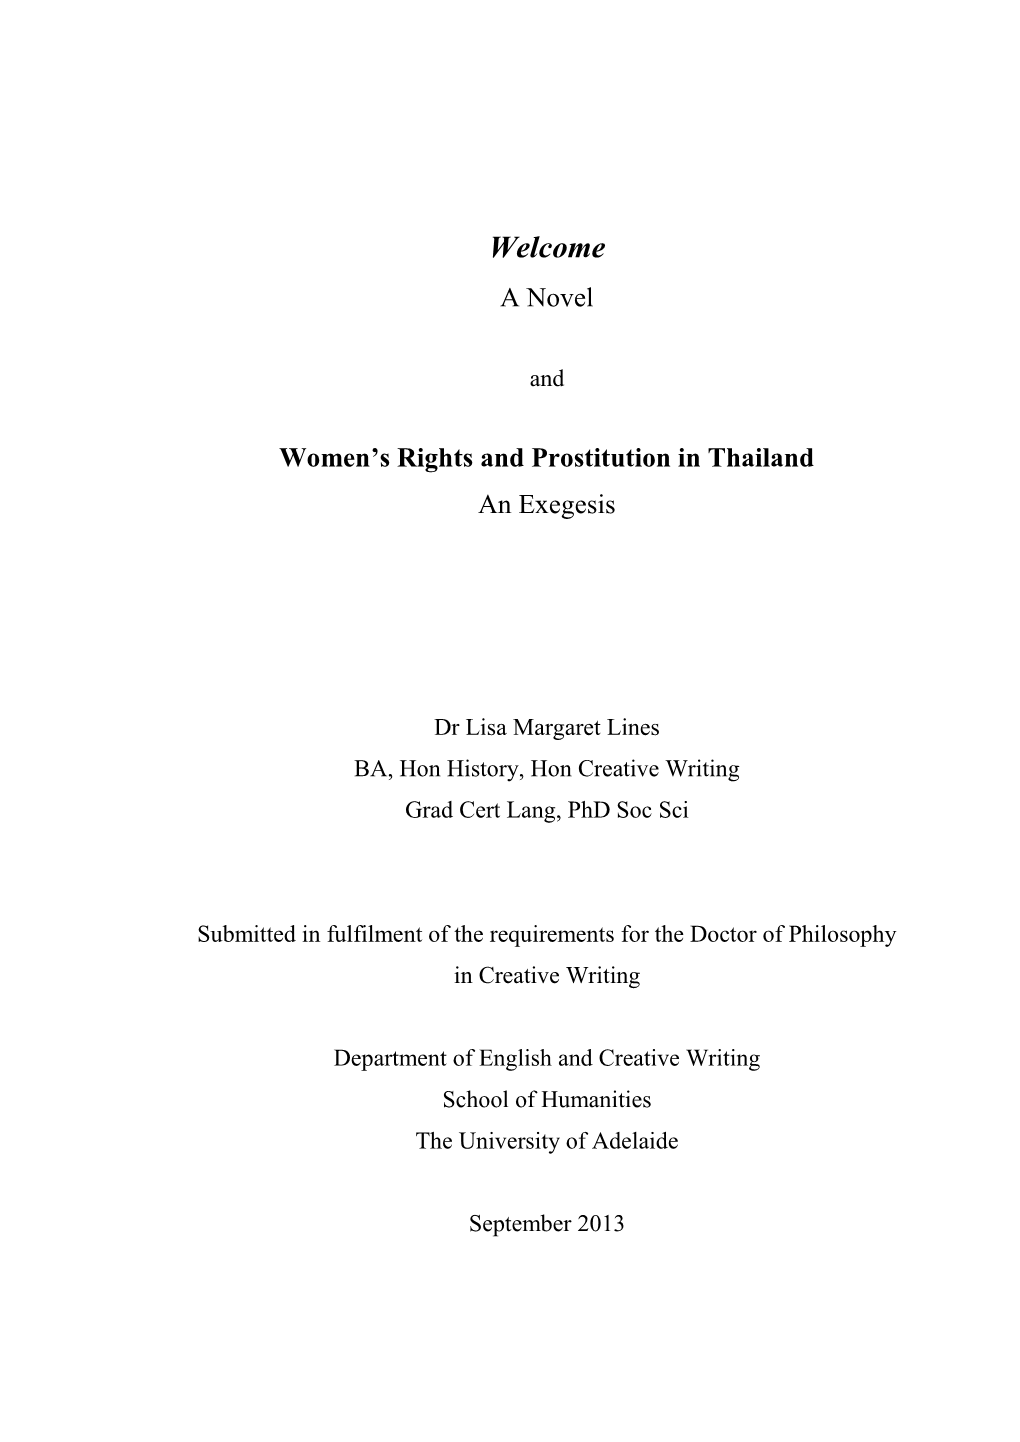 A Novel / Women's Rights and Prostitution in Thailand: an Exegesis